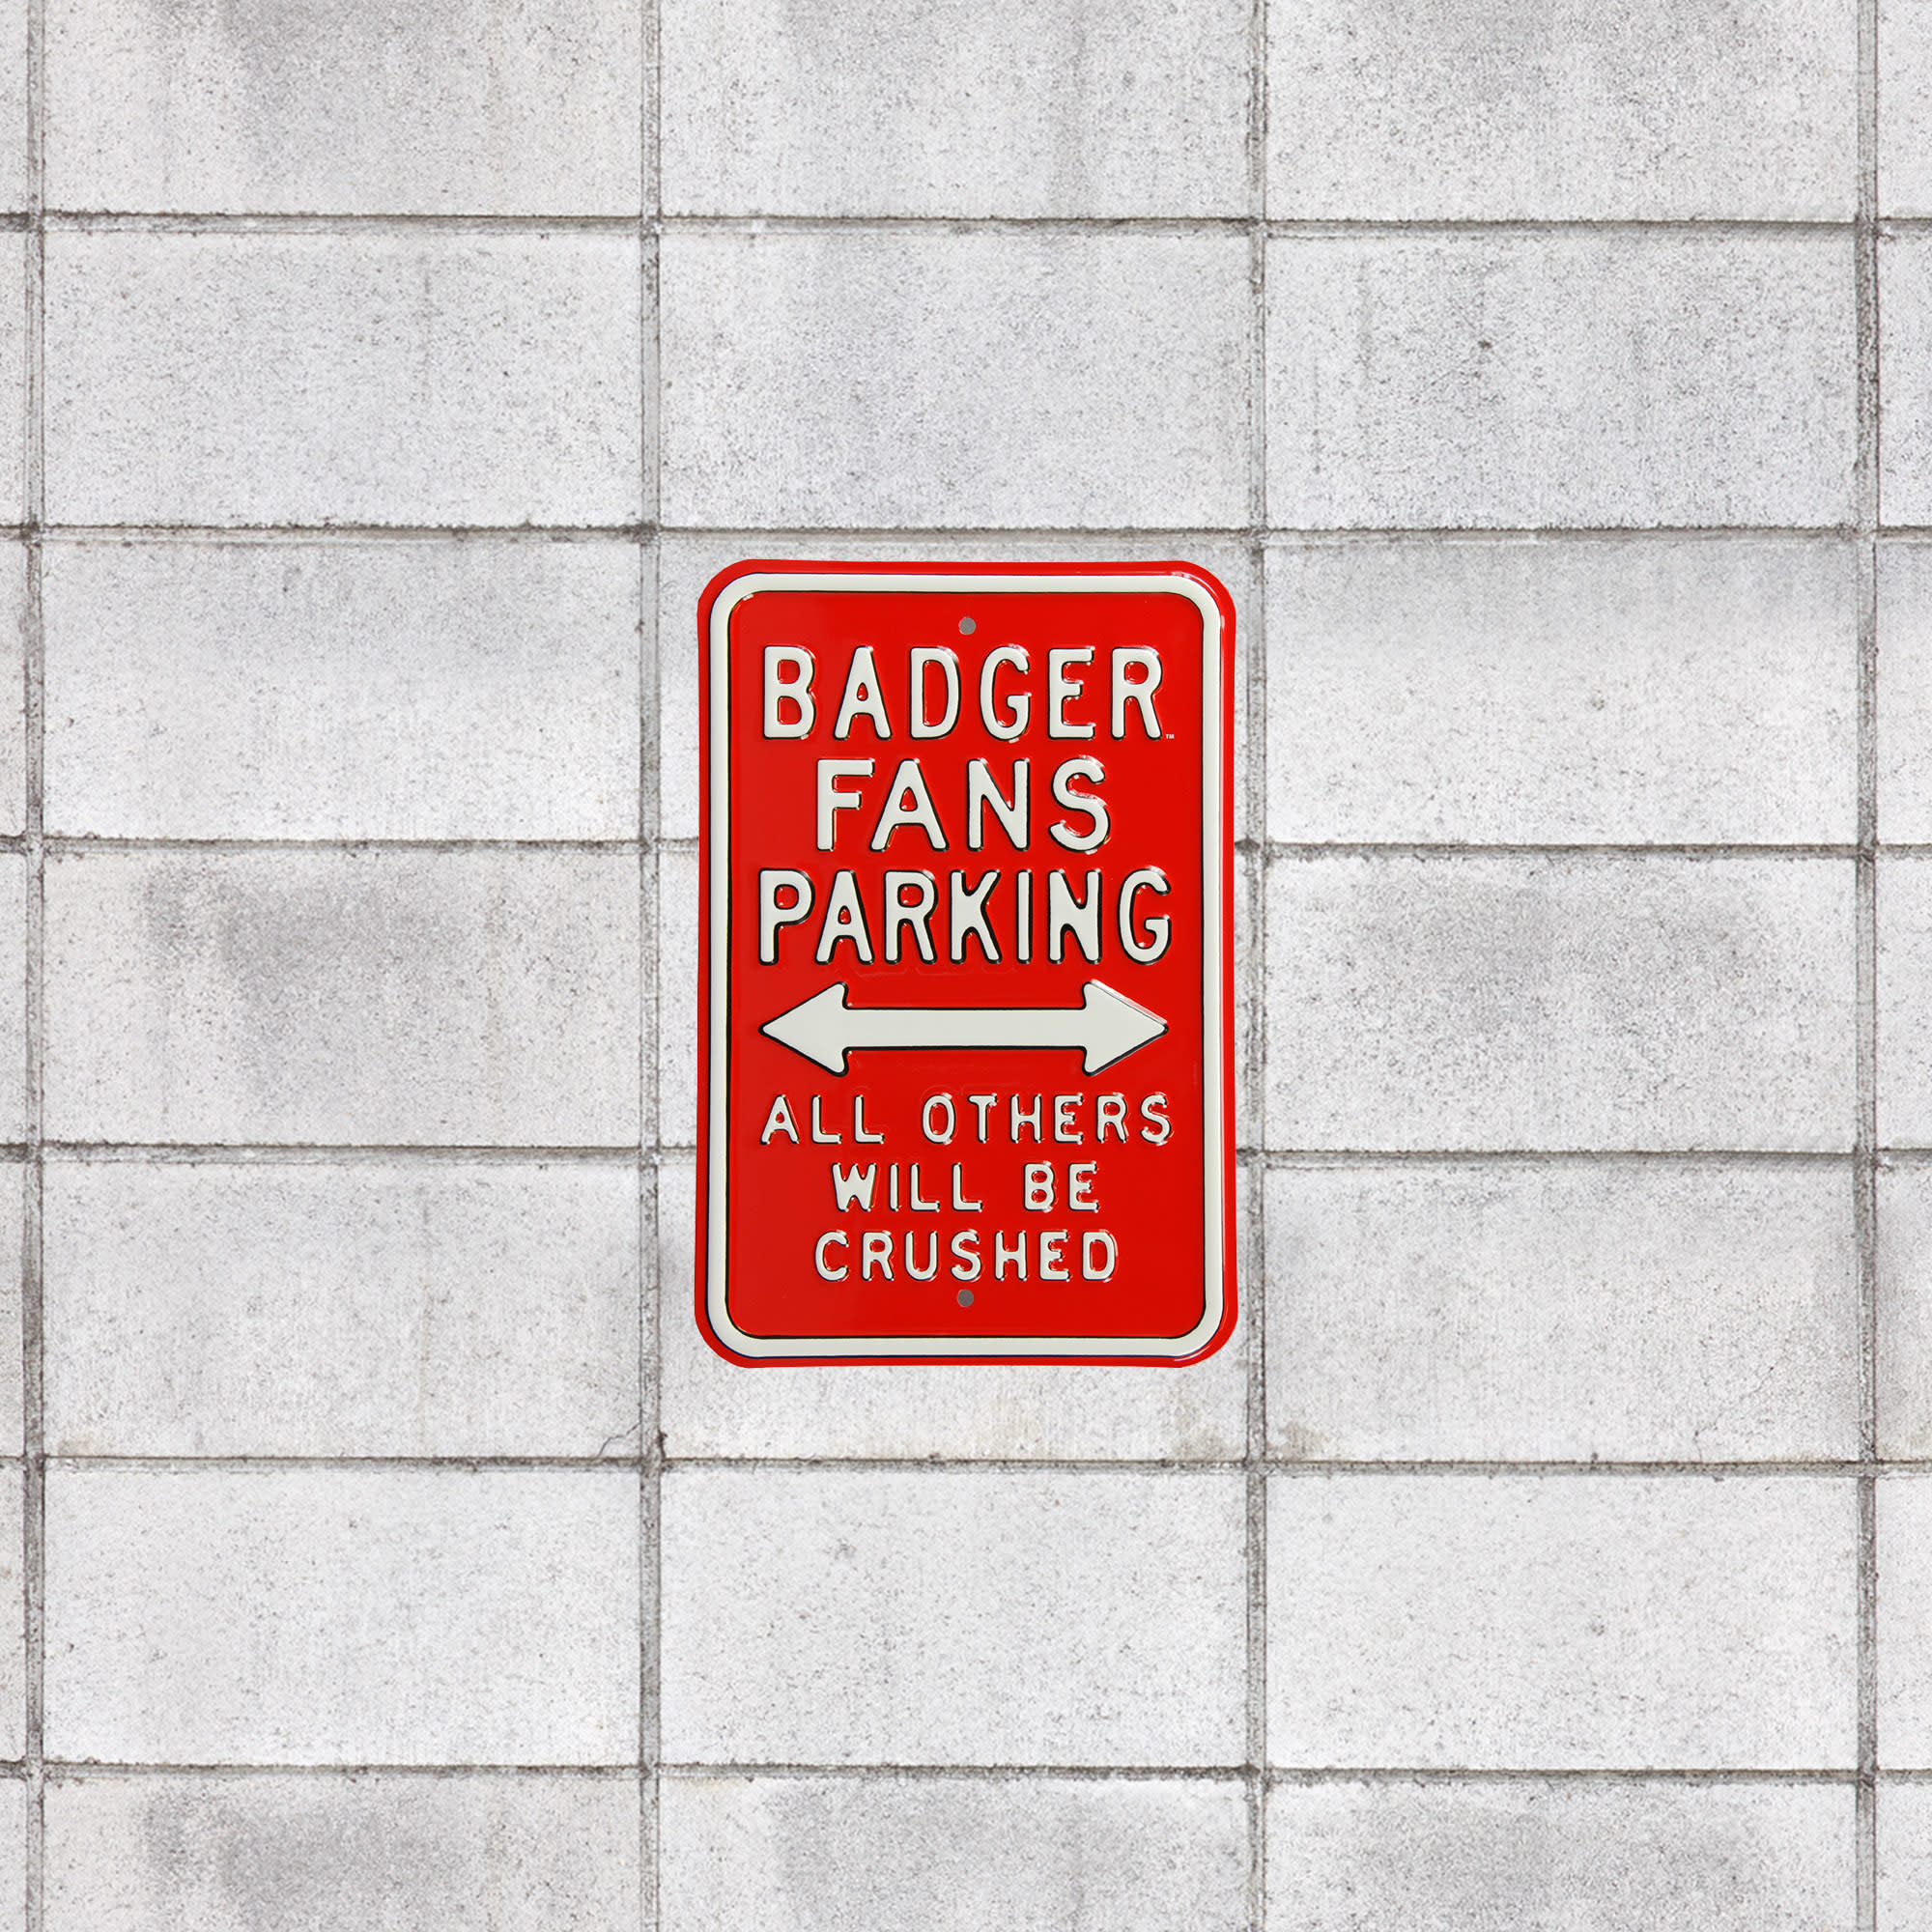 Wisconsin Badgers: Crushed Parking - Officially Licensed Metal Street Sign 18.0"W x 12.0"H by Fathead | 100% Steel